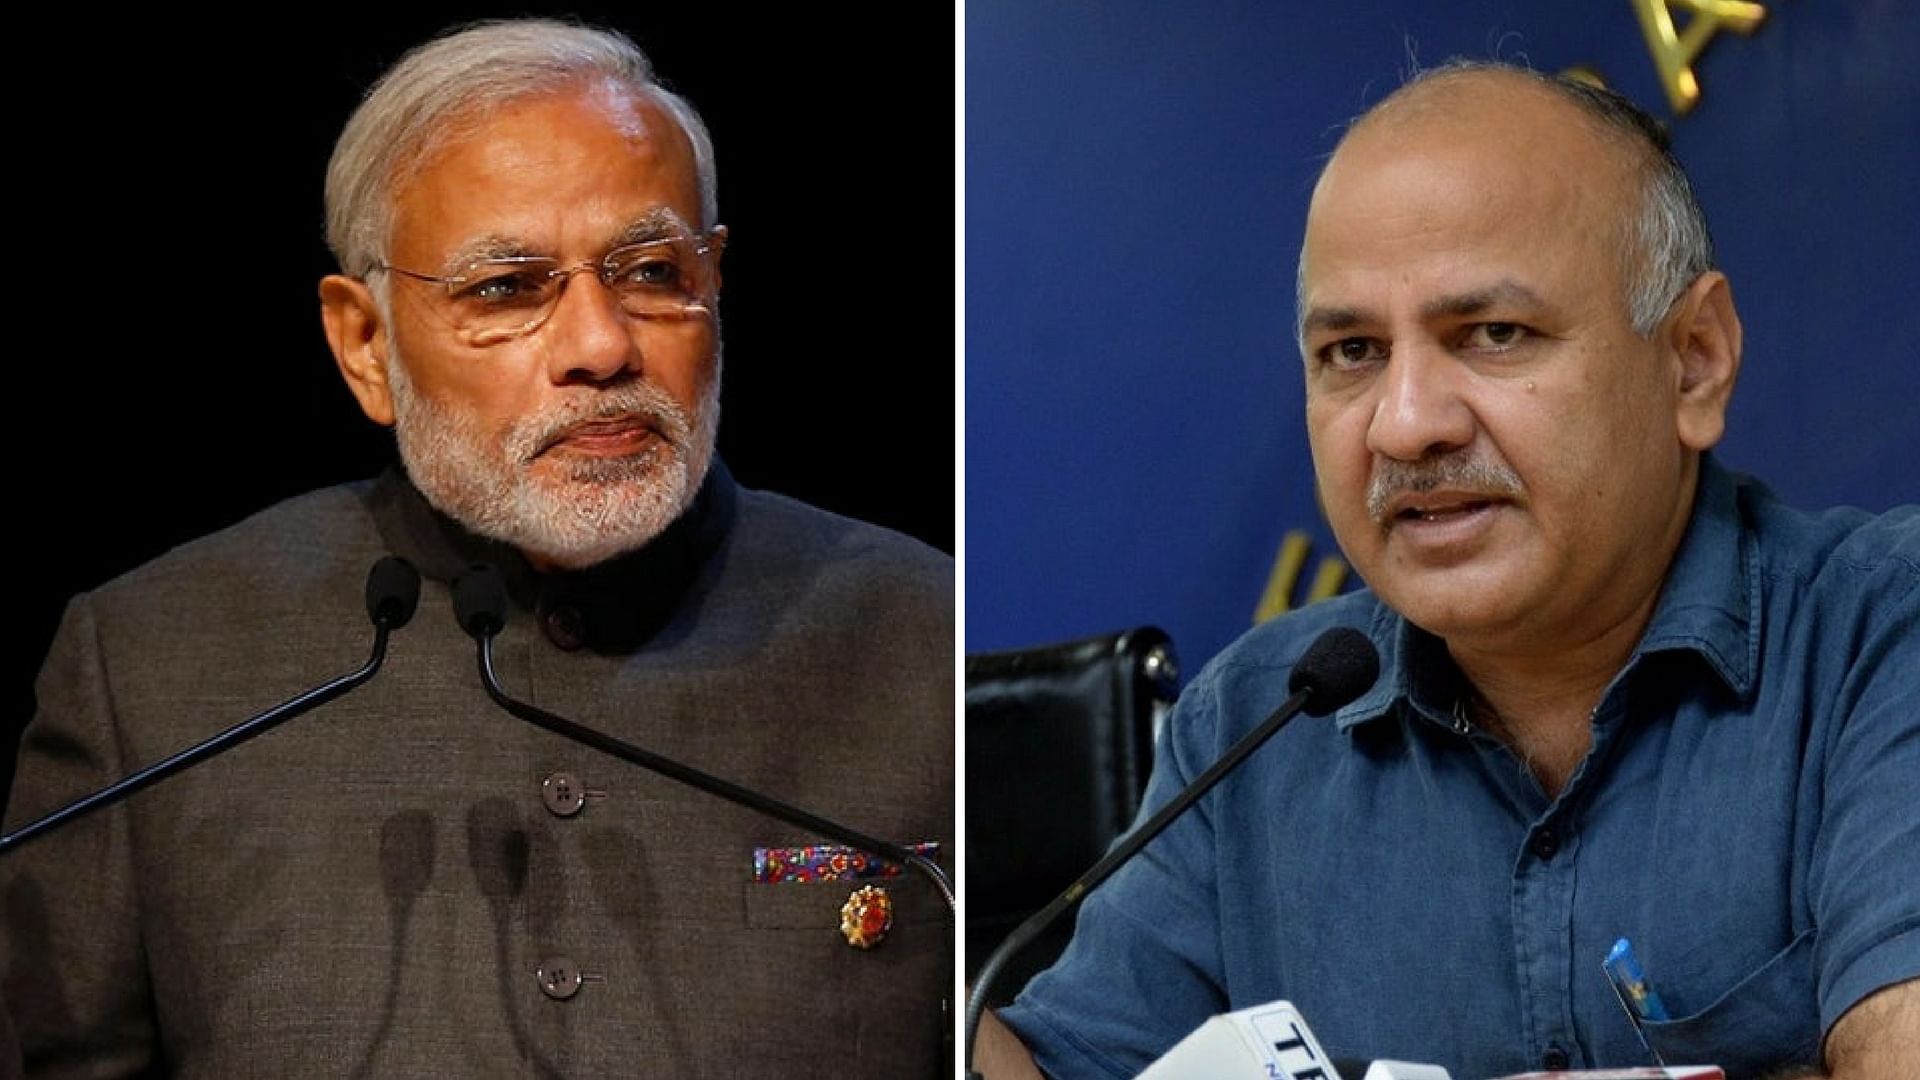 

AAP leader Manish Sisodia claimed the PM presented the “facts wrongly” when he spoke on the GDP slowdown on Wednesday.&nbsp;